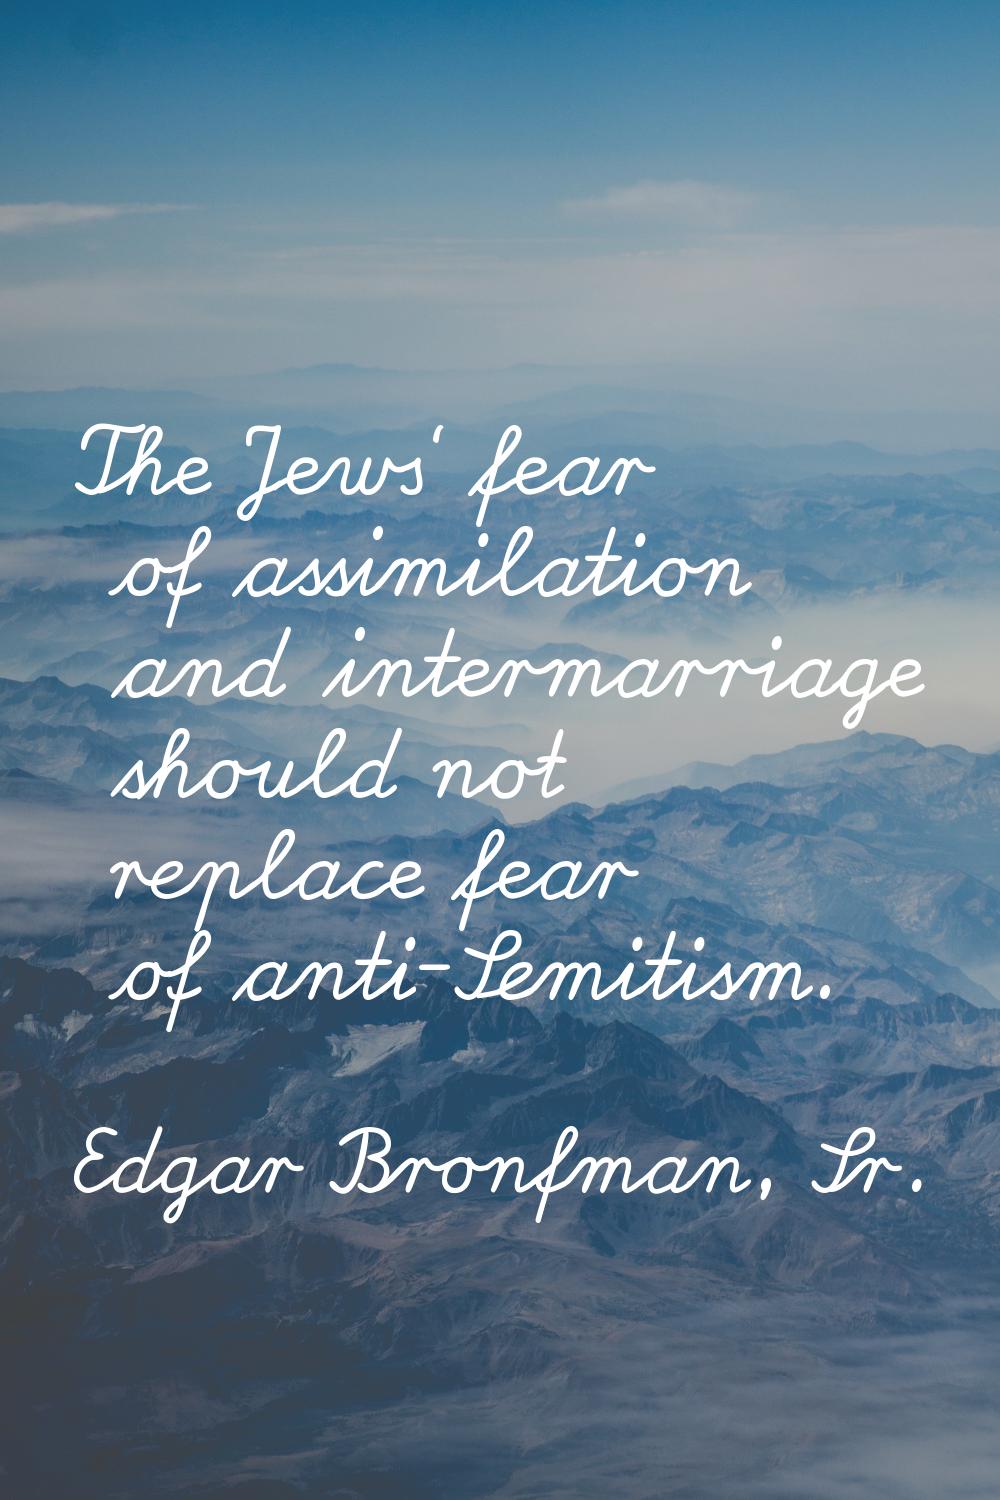 The Jews' fear of assimilation and intermarriage should not replace fear of anti-Semitism.